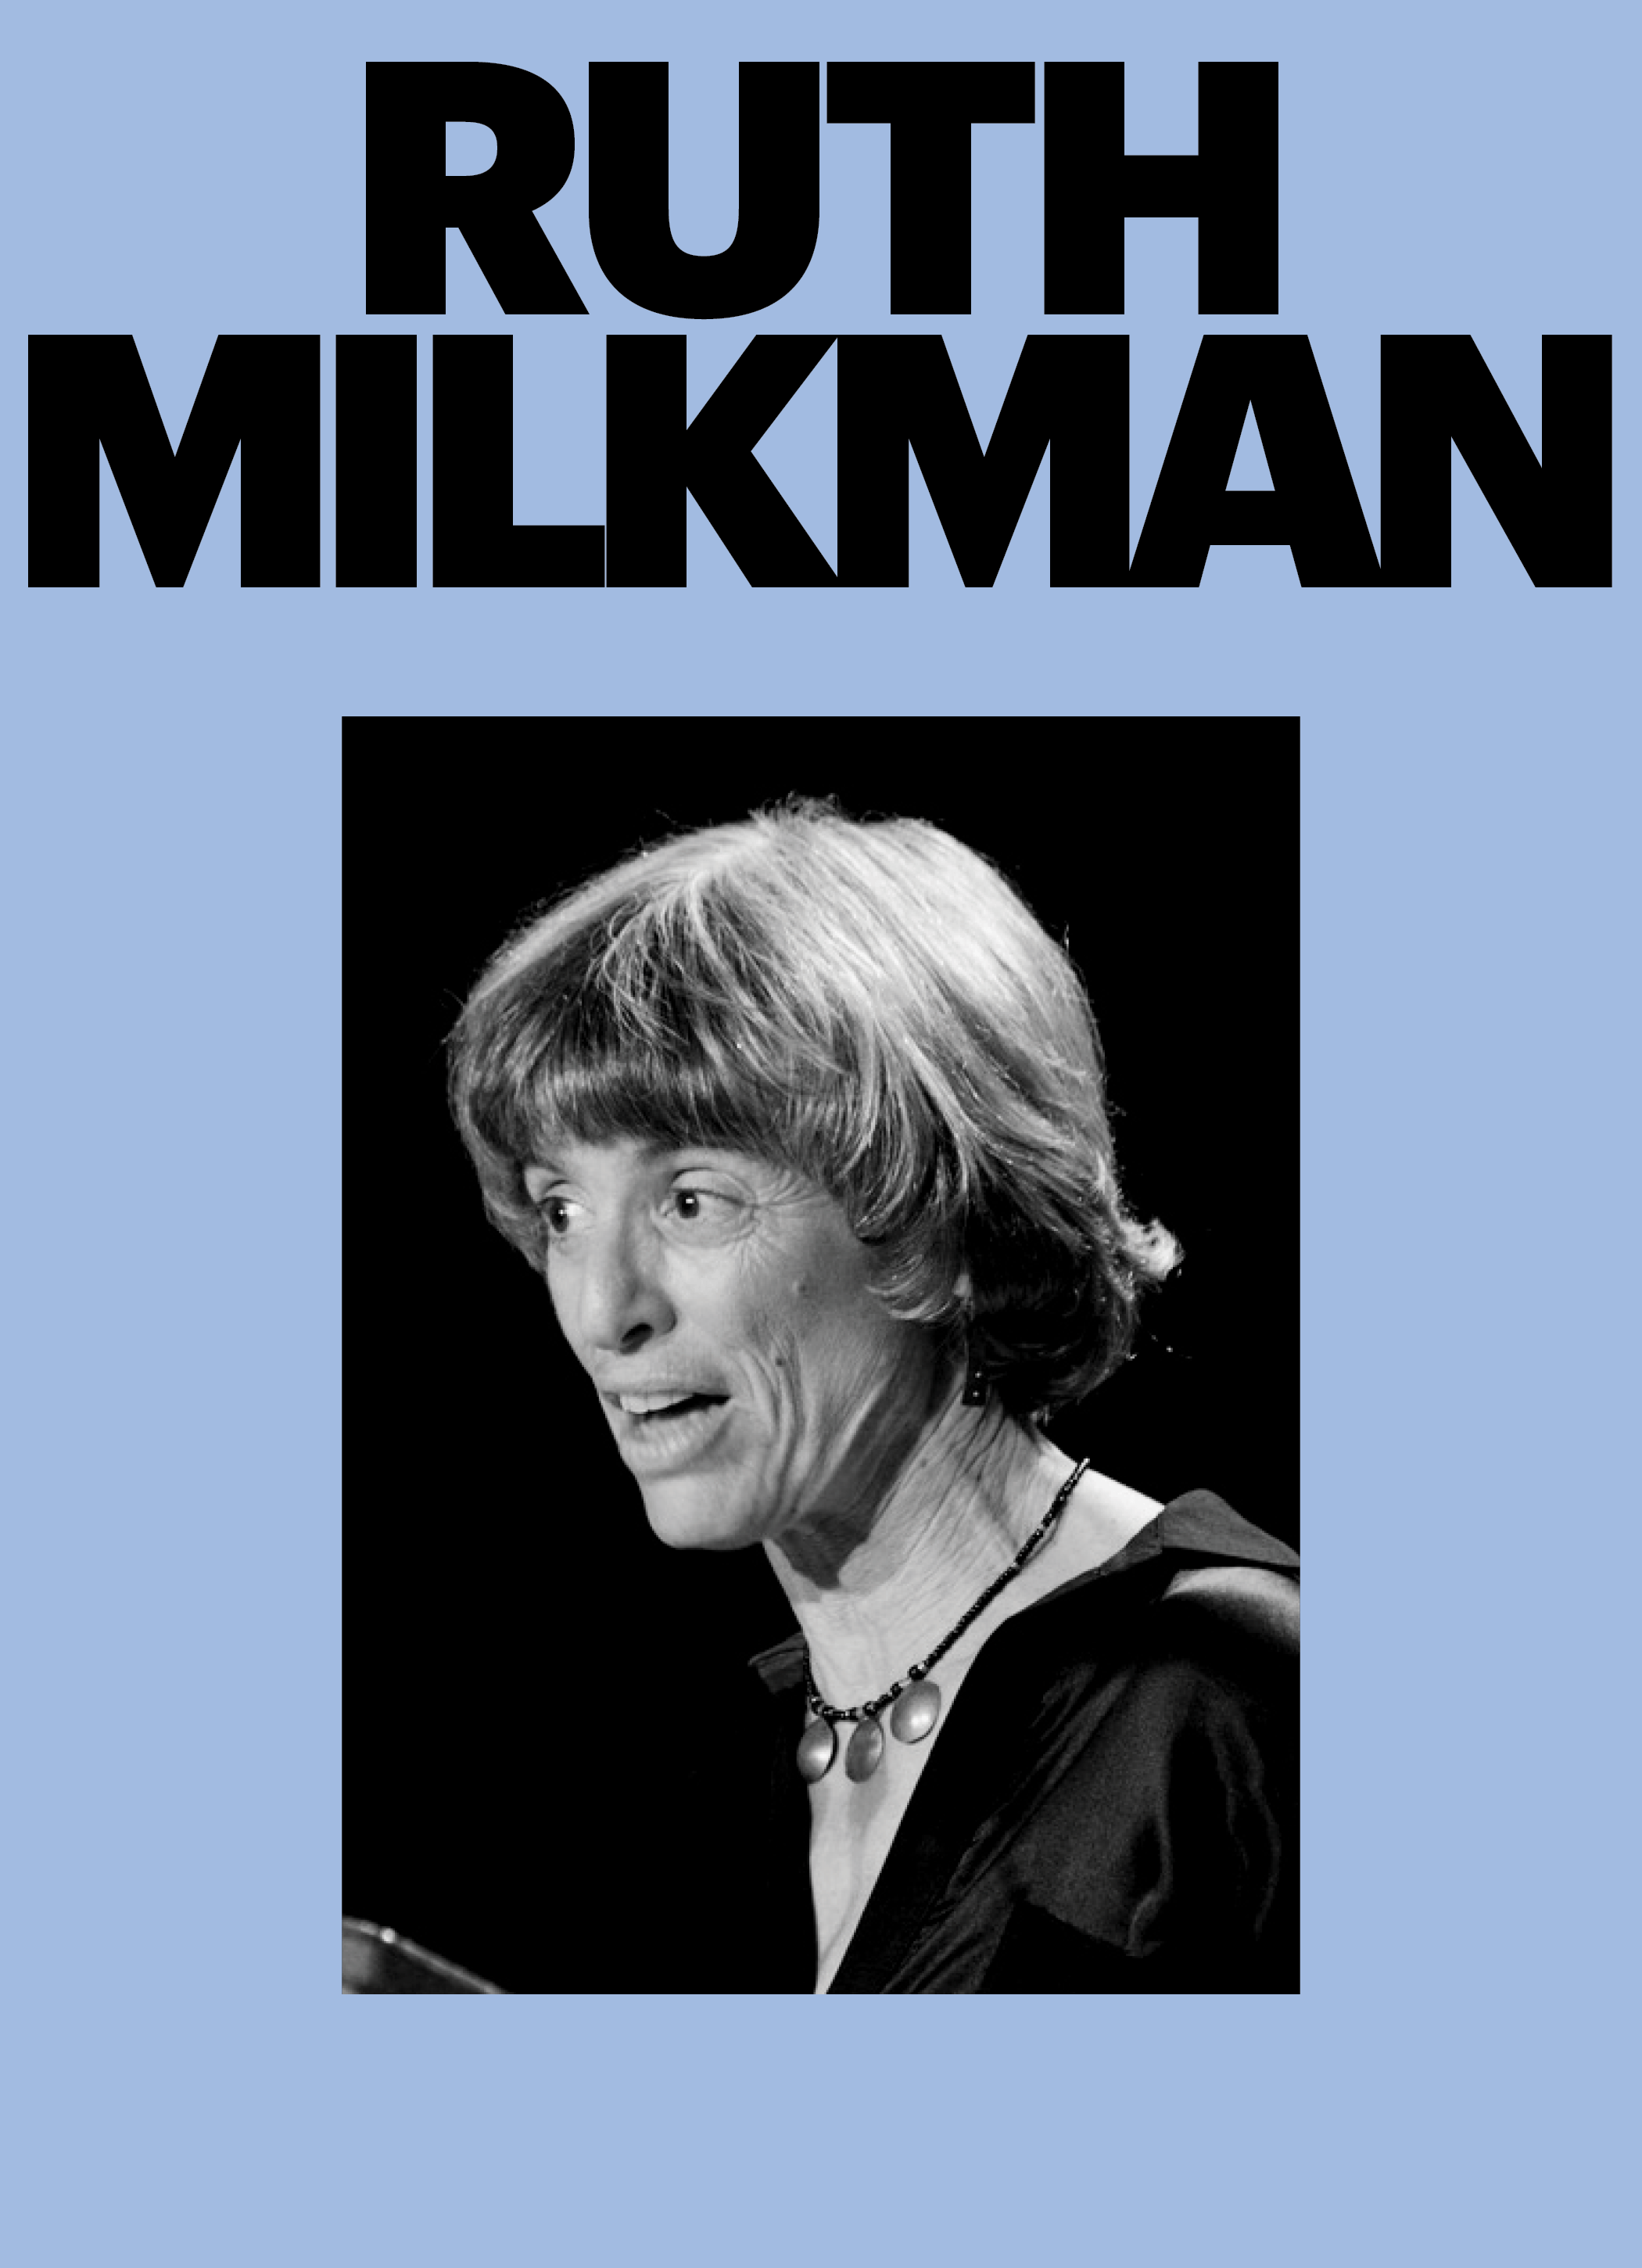 amy brame recommends Interview With A Milkman